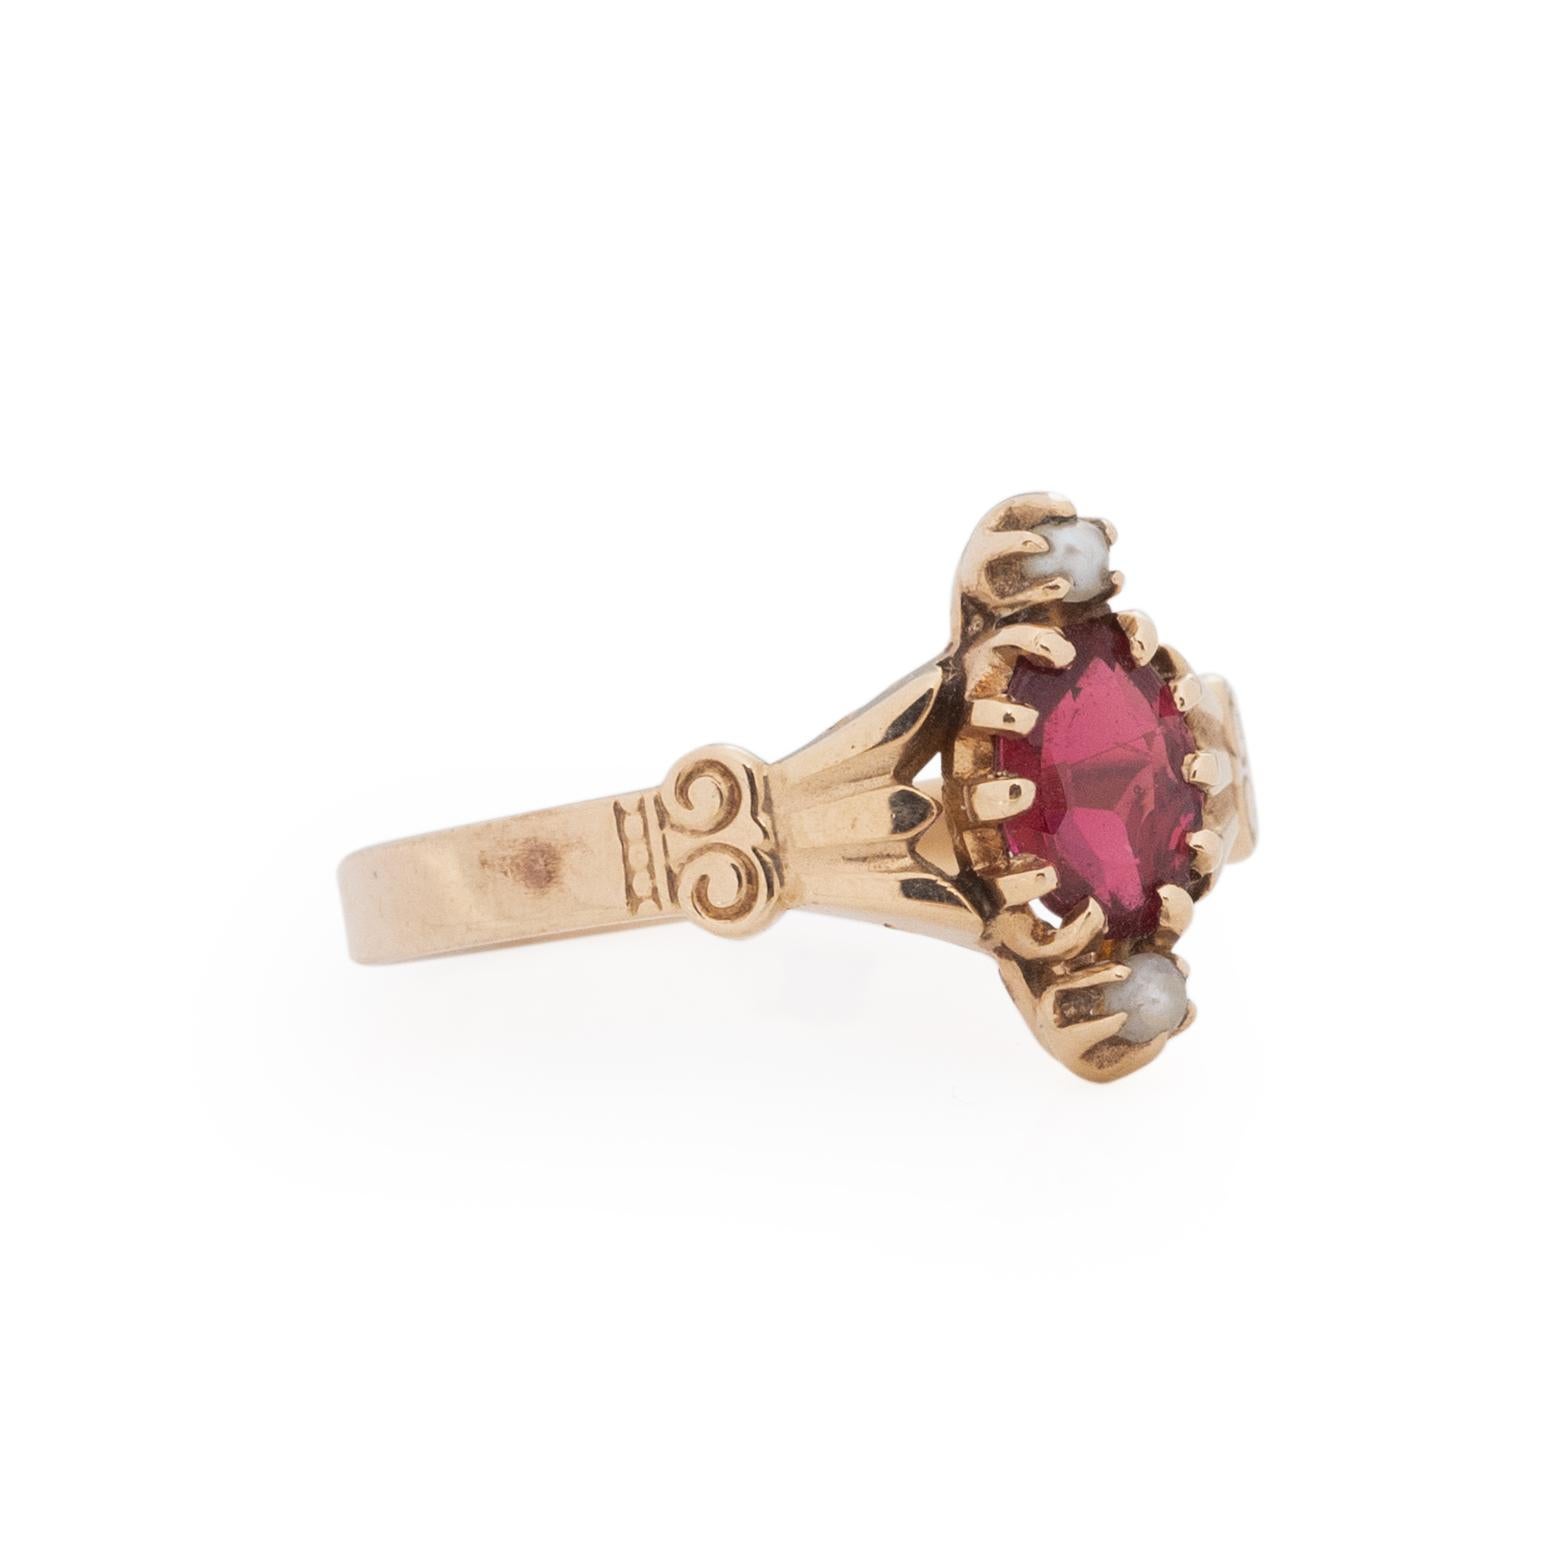 This little Victorian classic is a cutie! Crafted in 10K yellow gold with a small rose hue, the lightly detailed shank is excellently designed. Reminiscent on a roman column, the scroll design only adds to the overall look of this piece. Where the